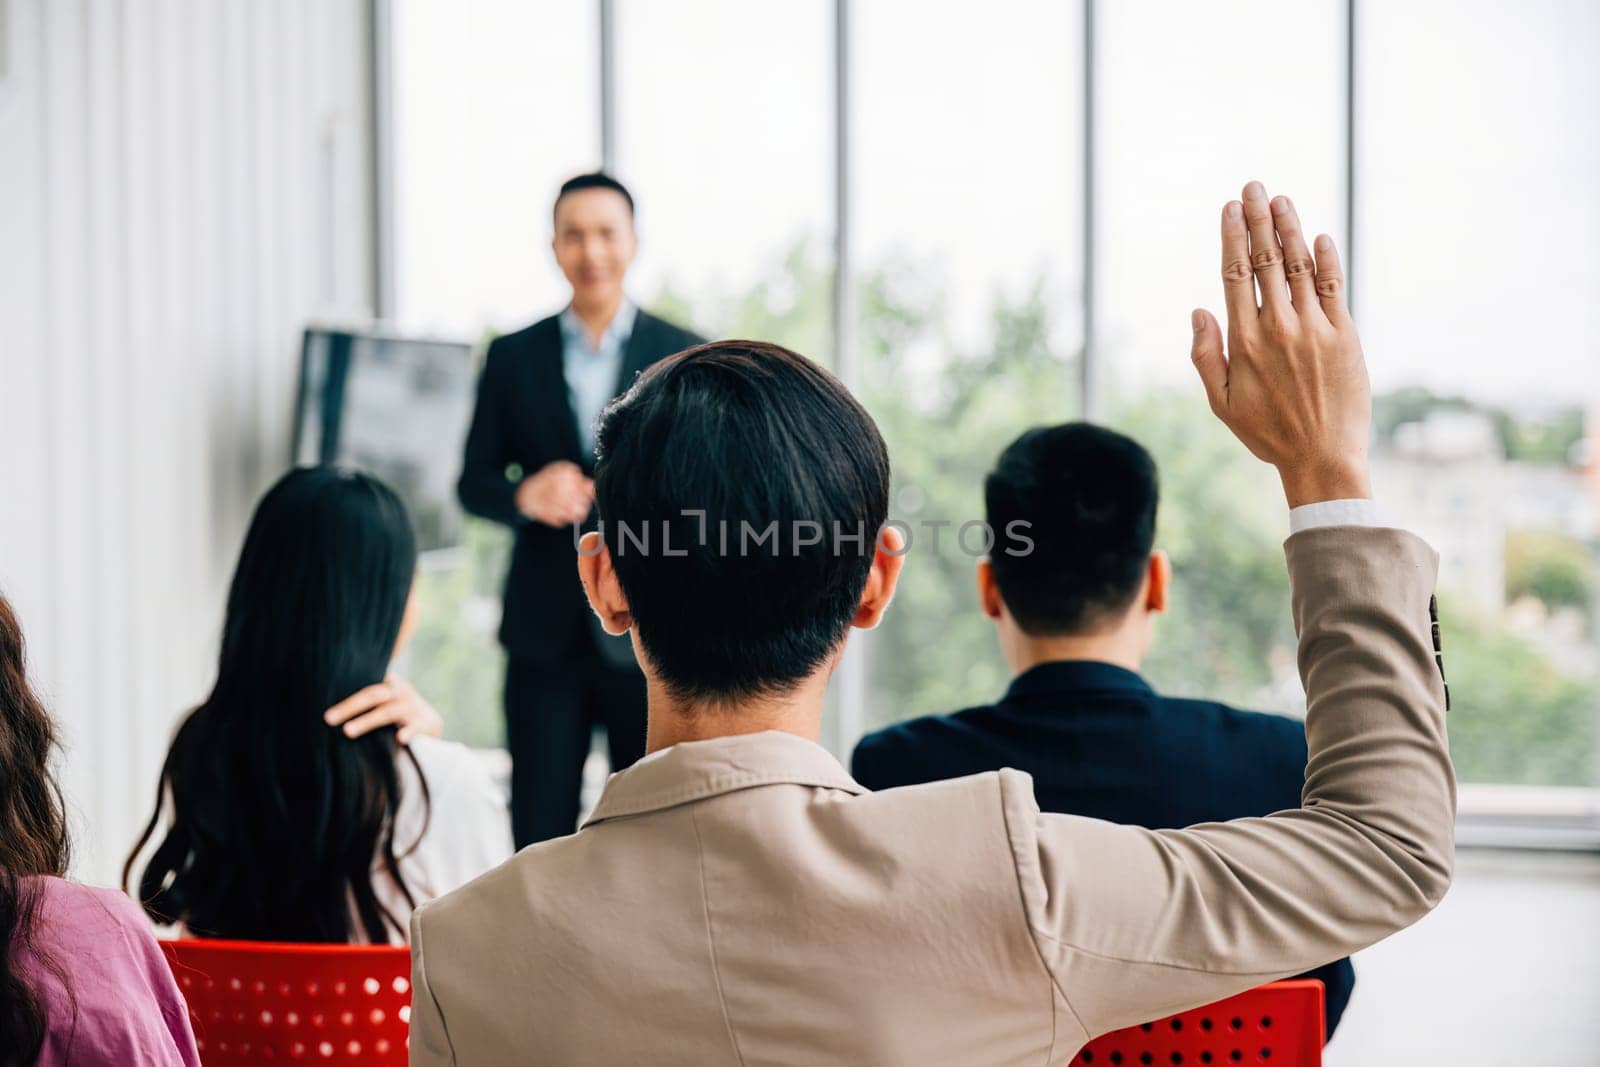 At a conference, hands are raised for questions, underlining the active participation of the audience. A diverse group collaborates in a workshop or seminar, emphasizing teamwork and discussion. by Sorapop